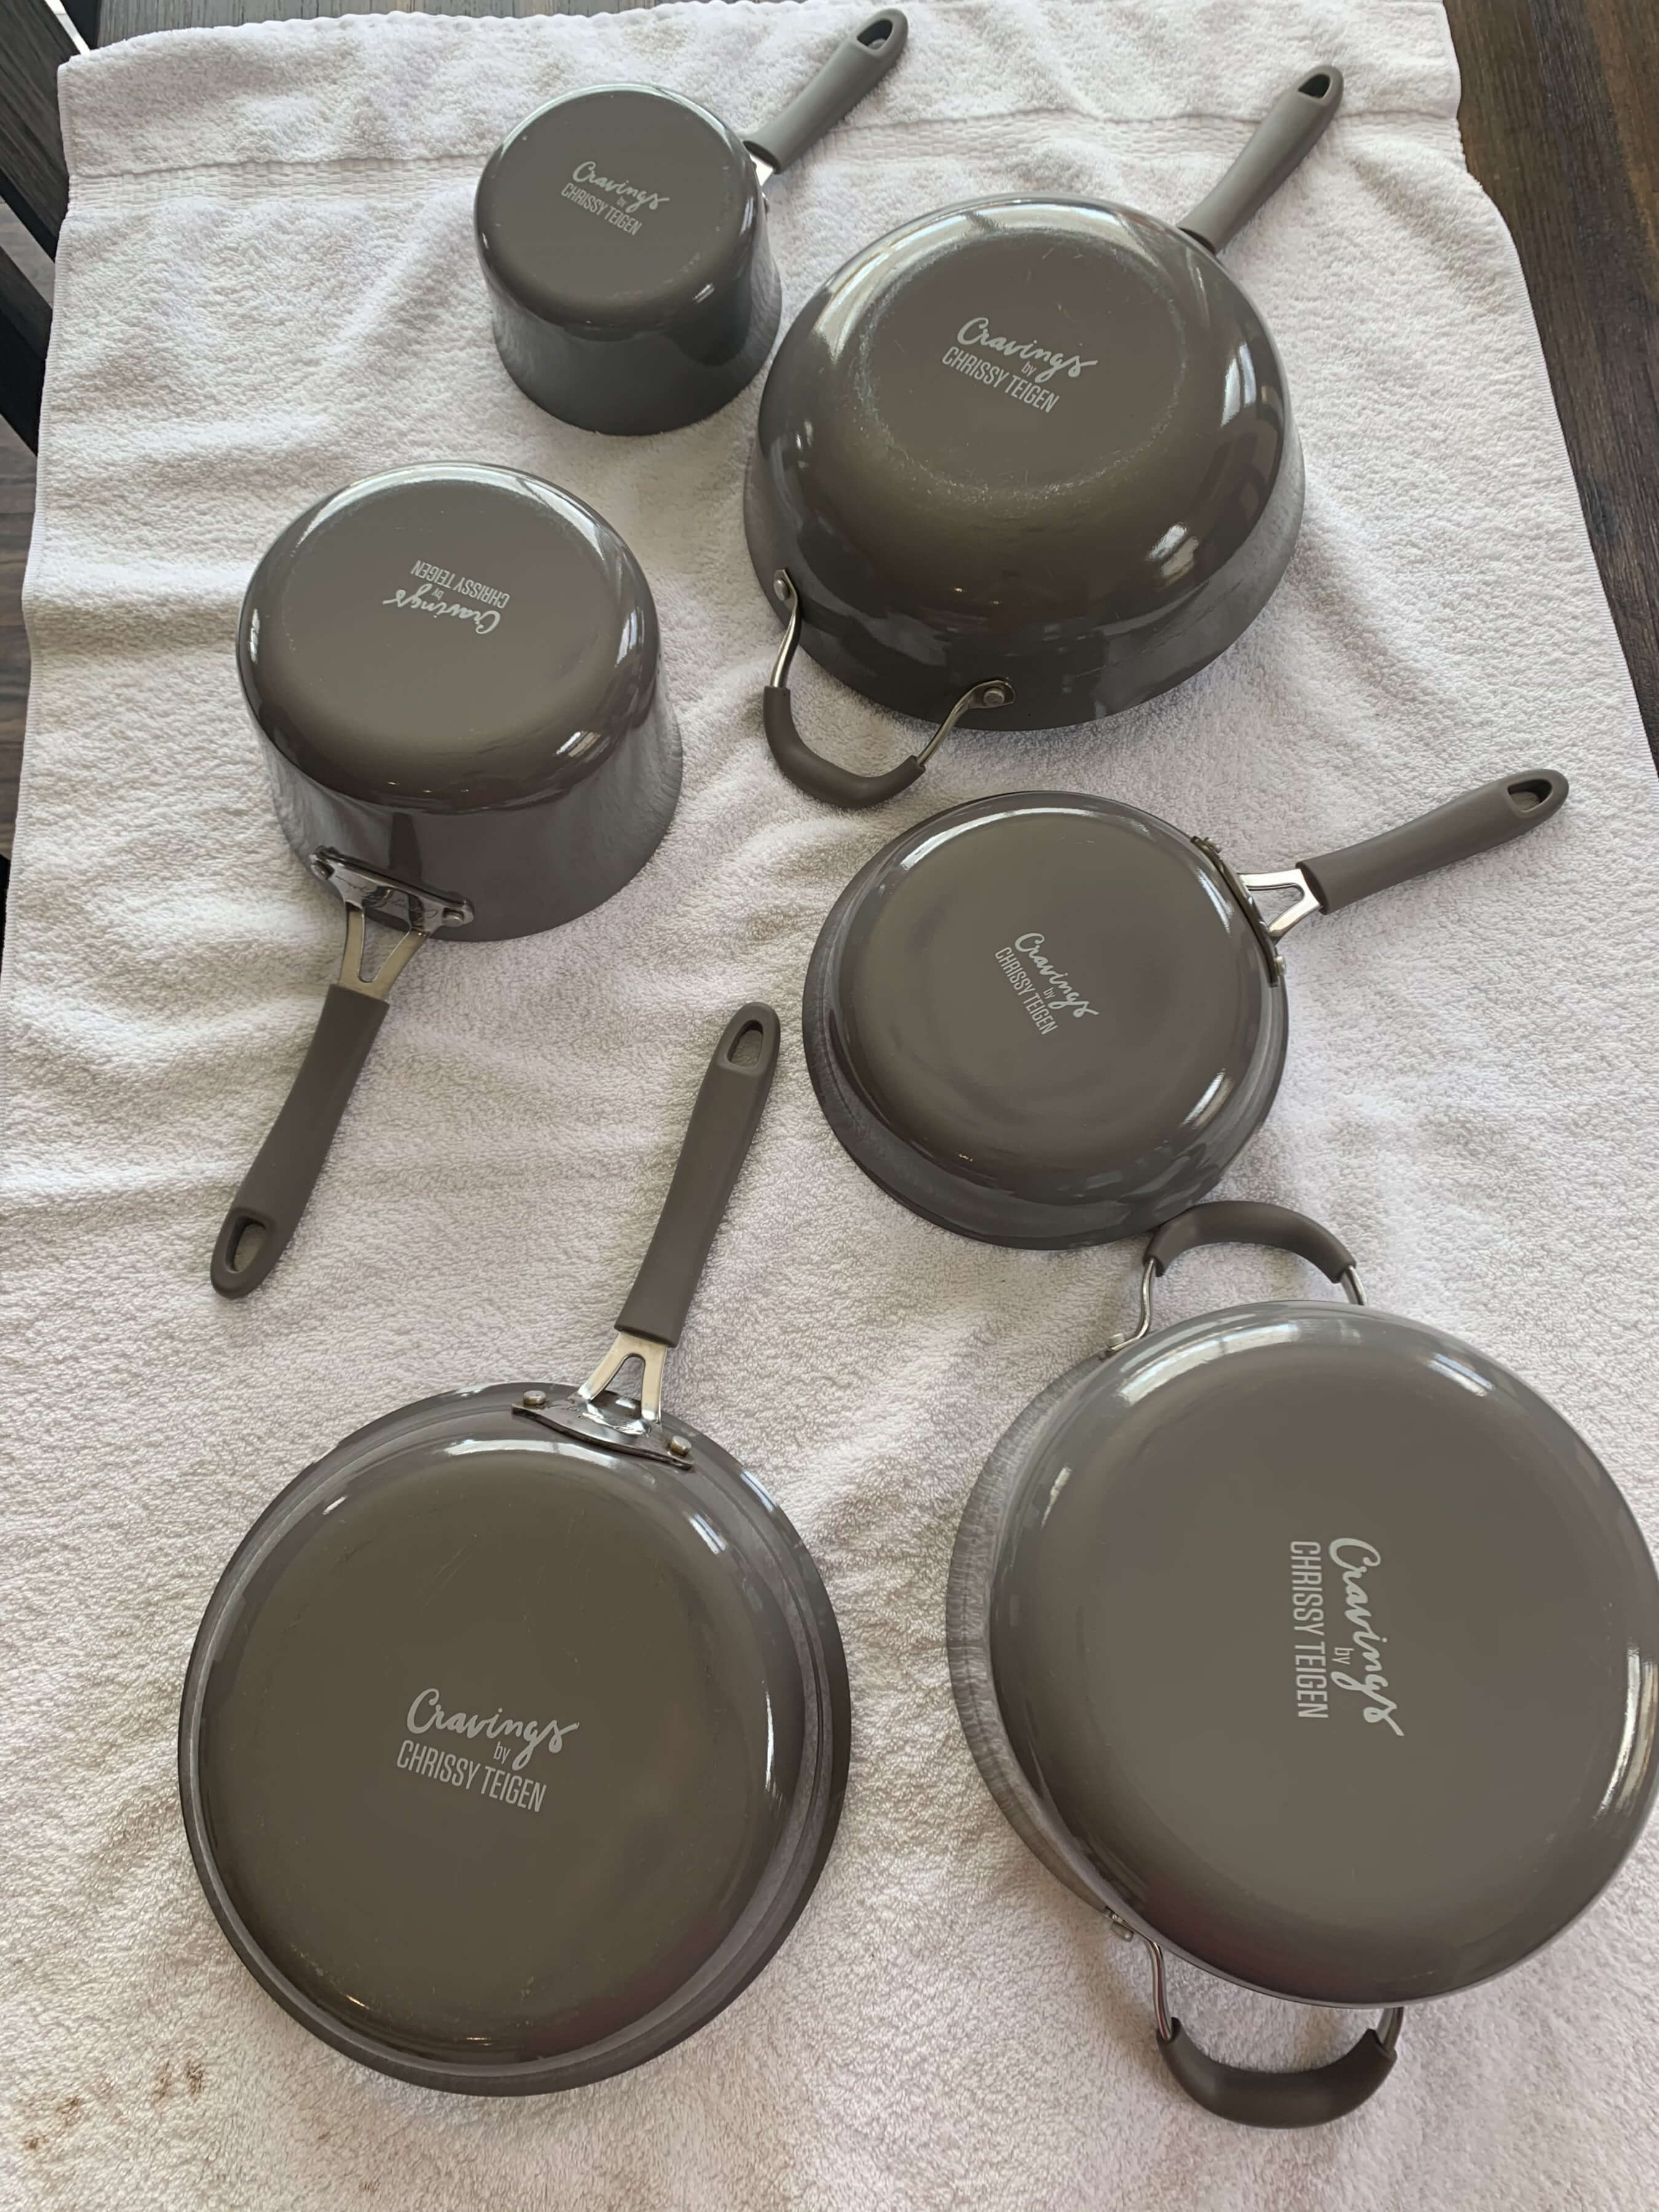 Caring for Your Cookware  Cravings by Chrissy Teigen